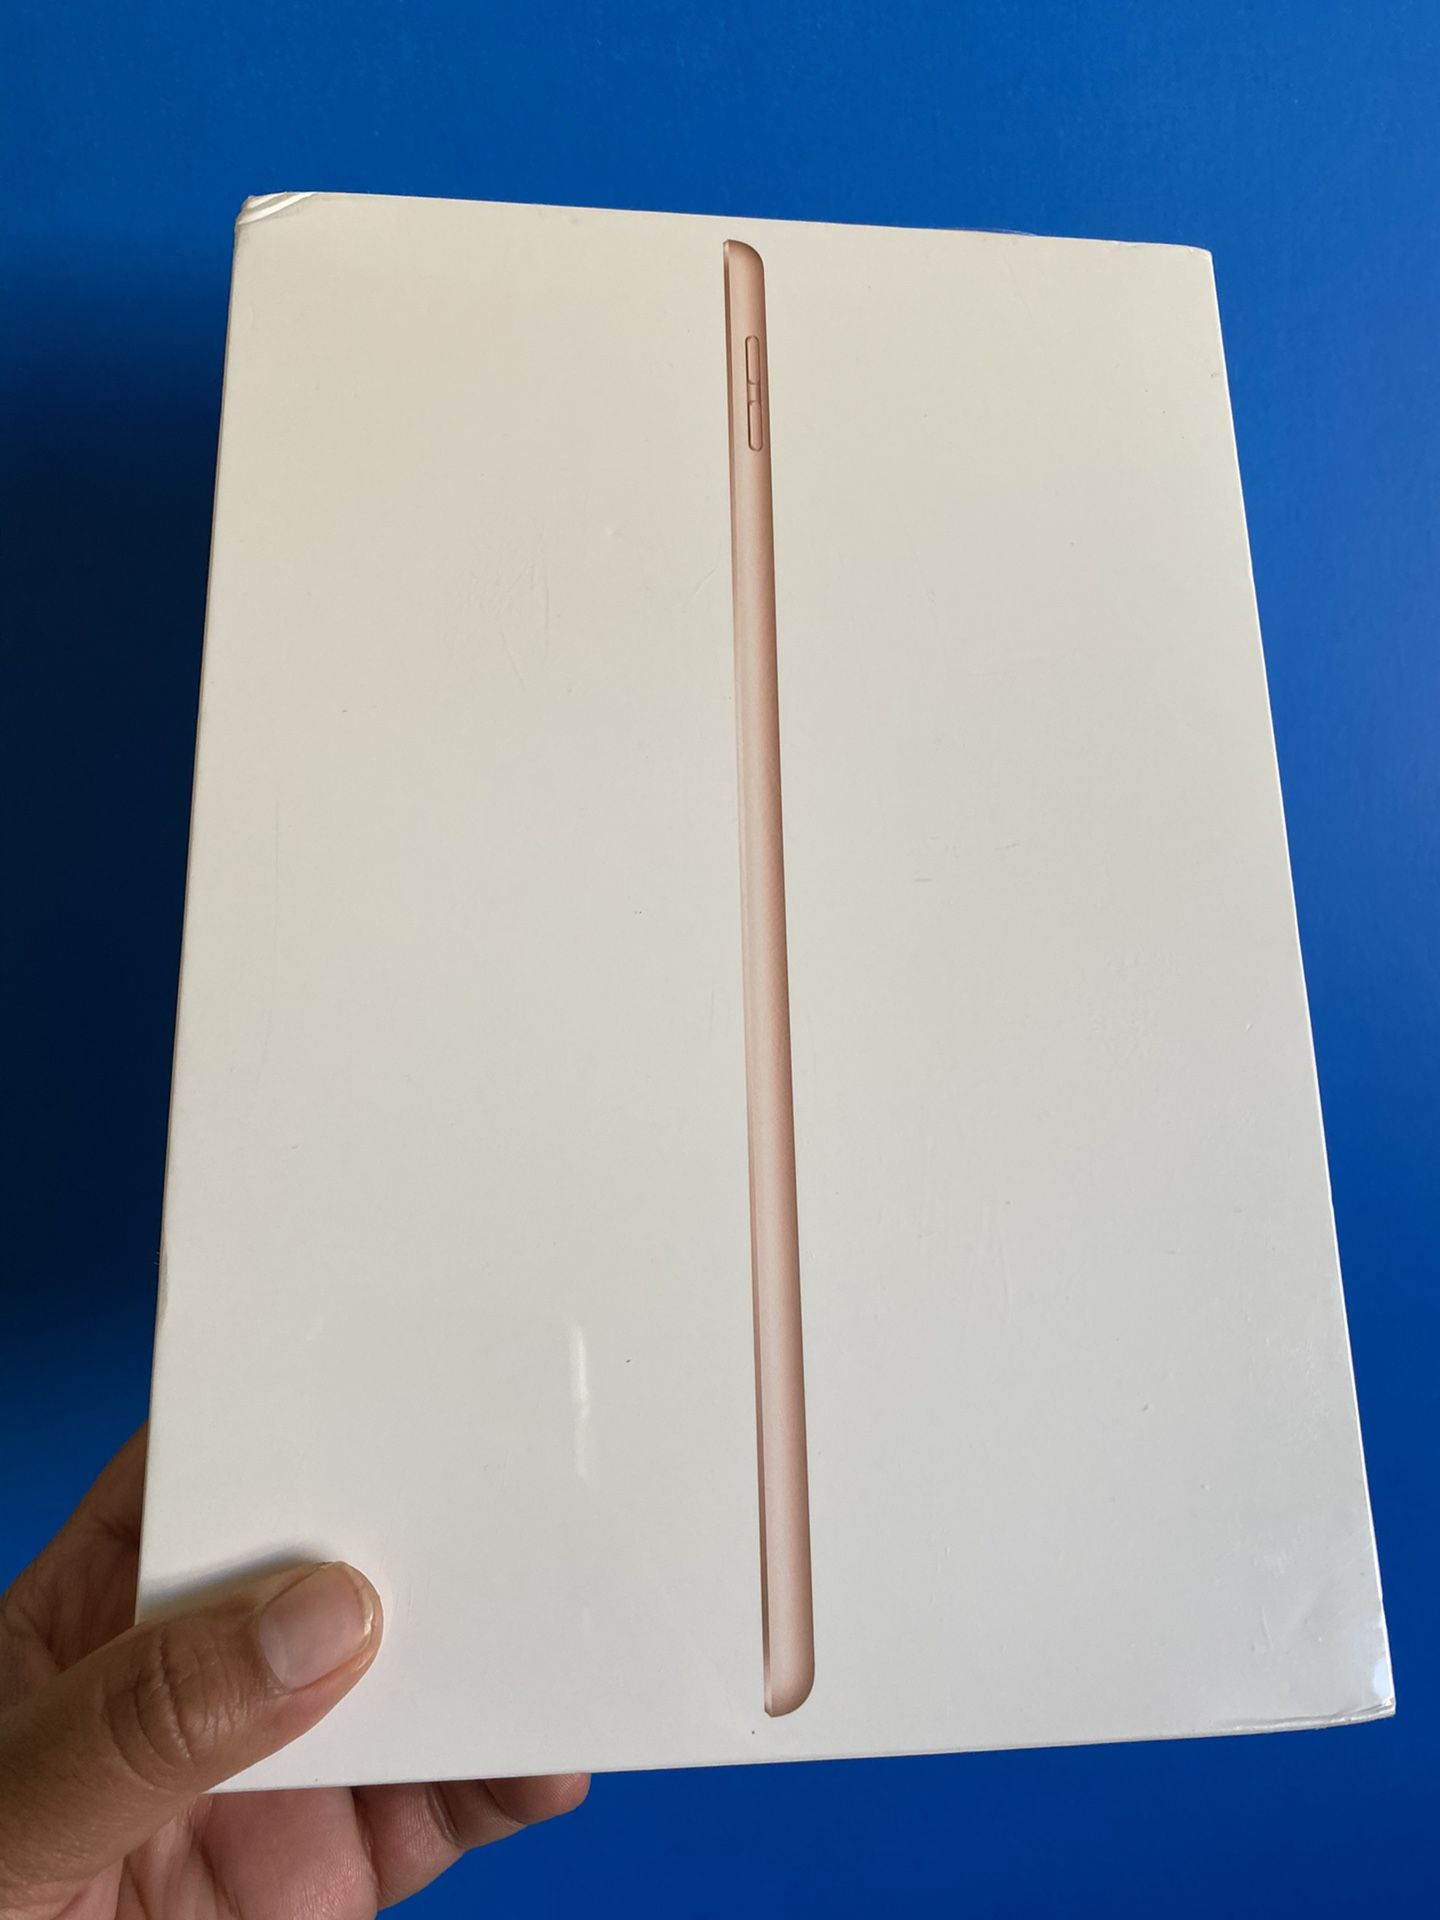 128GB Apple Ipad 7th Generation (10.2” Retina/ 2019 latest model) sealed brand new with new case & Screen protector